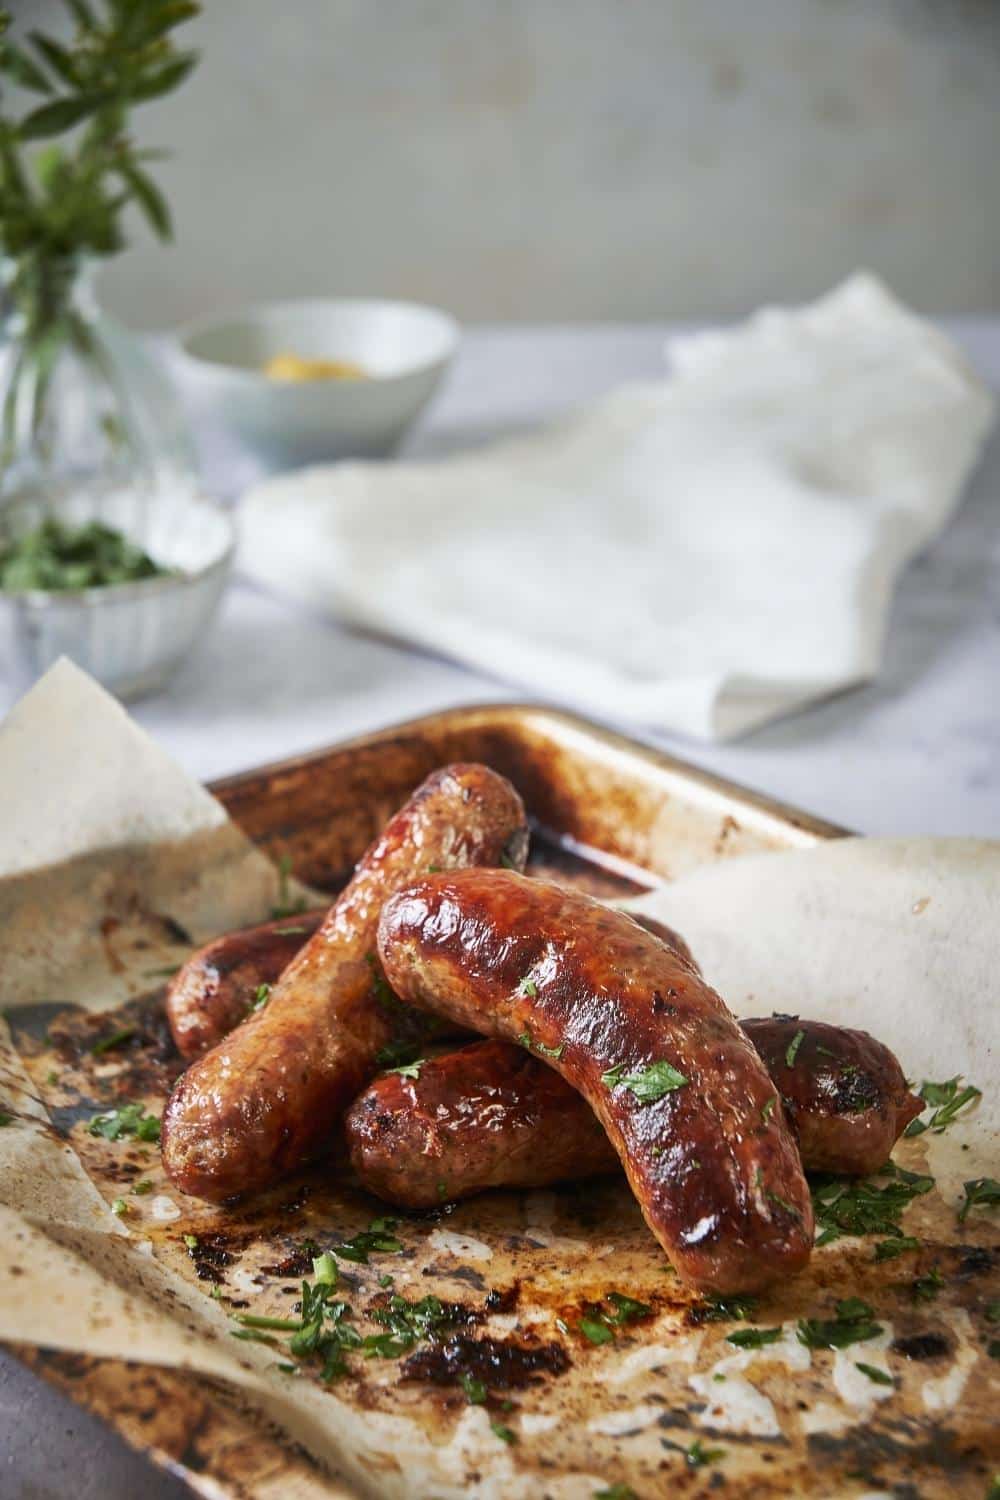 Four roasted brats slightly stacked on a sheet pan lined with parchment paper. The brats are garnished with parsley.